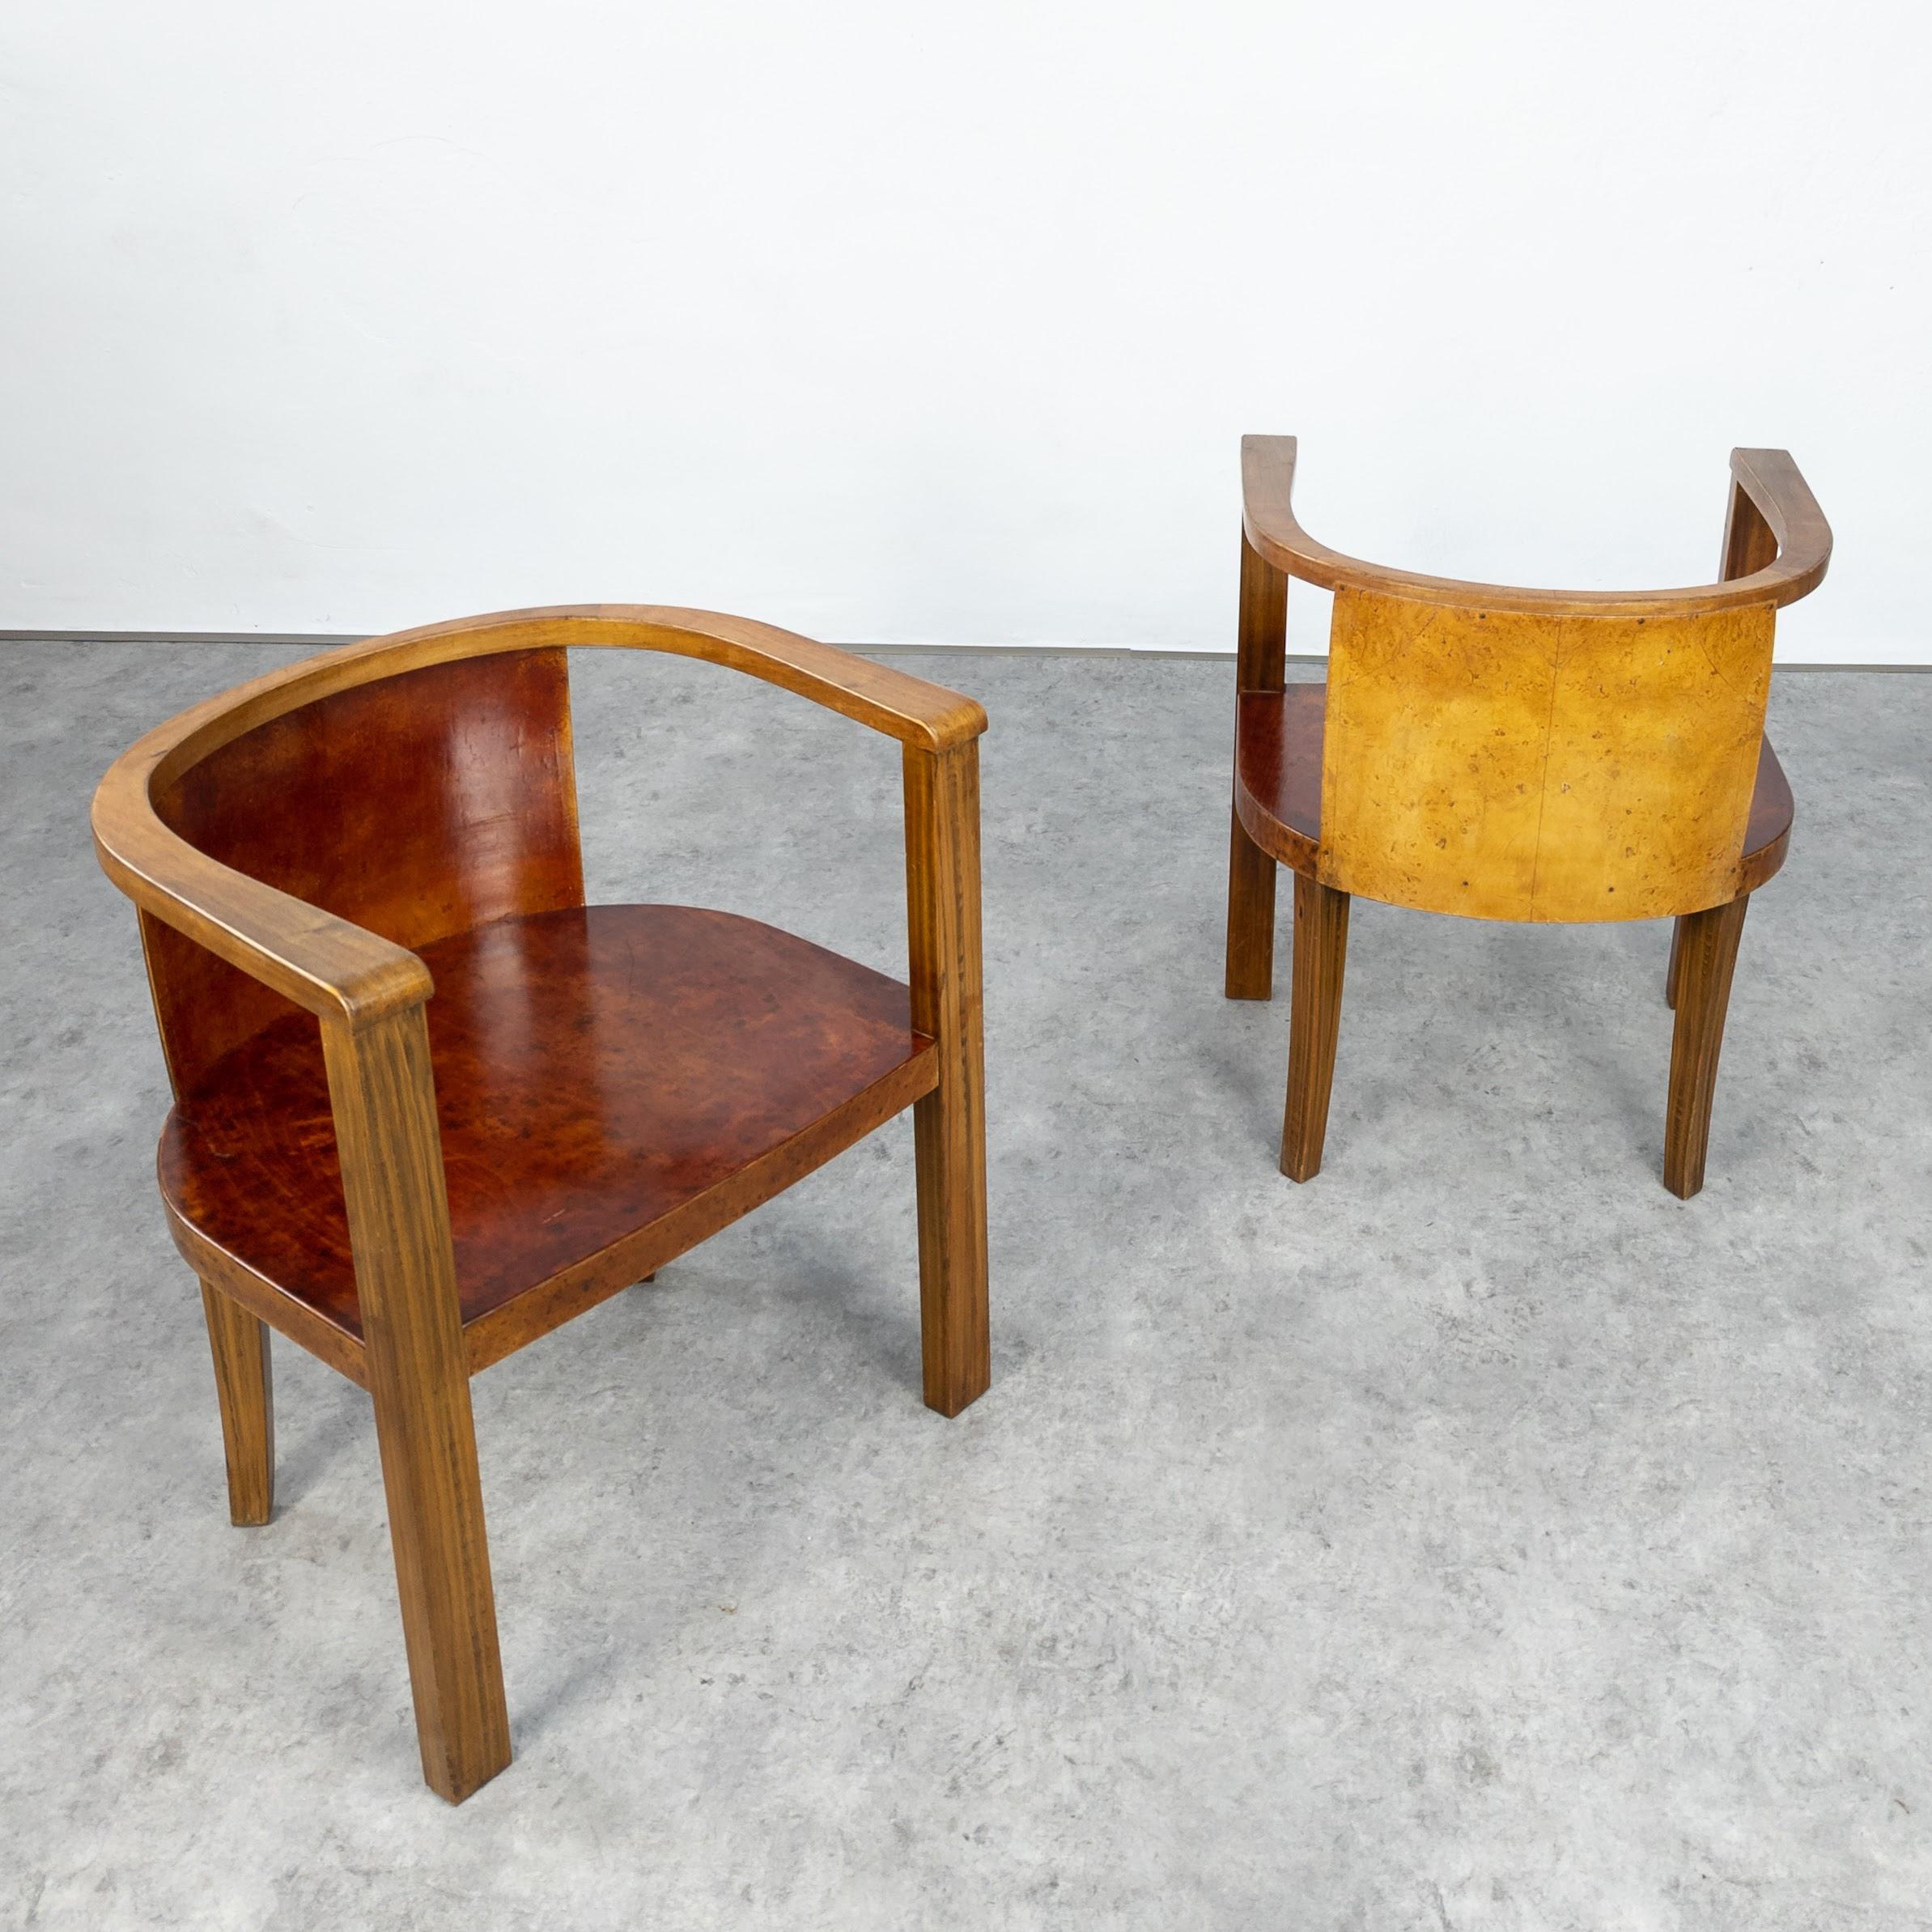 Pair of 1930's German Modernist Barrel Chairs For Sale 2